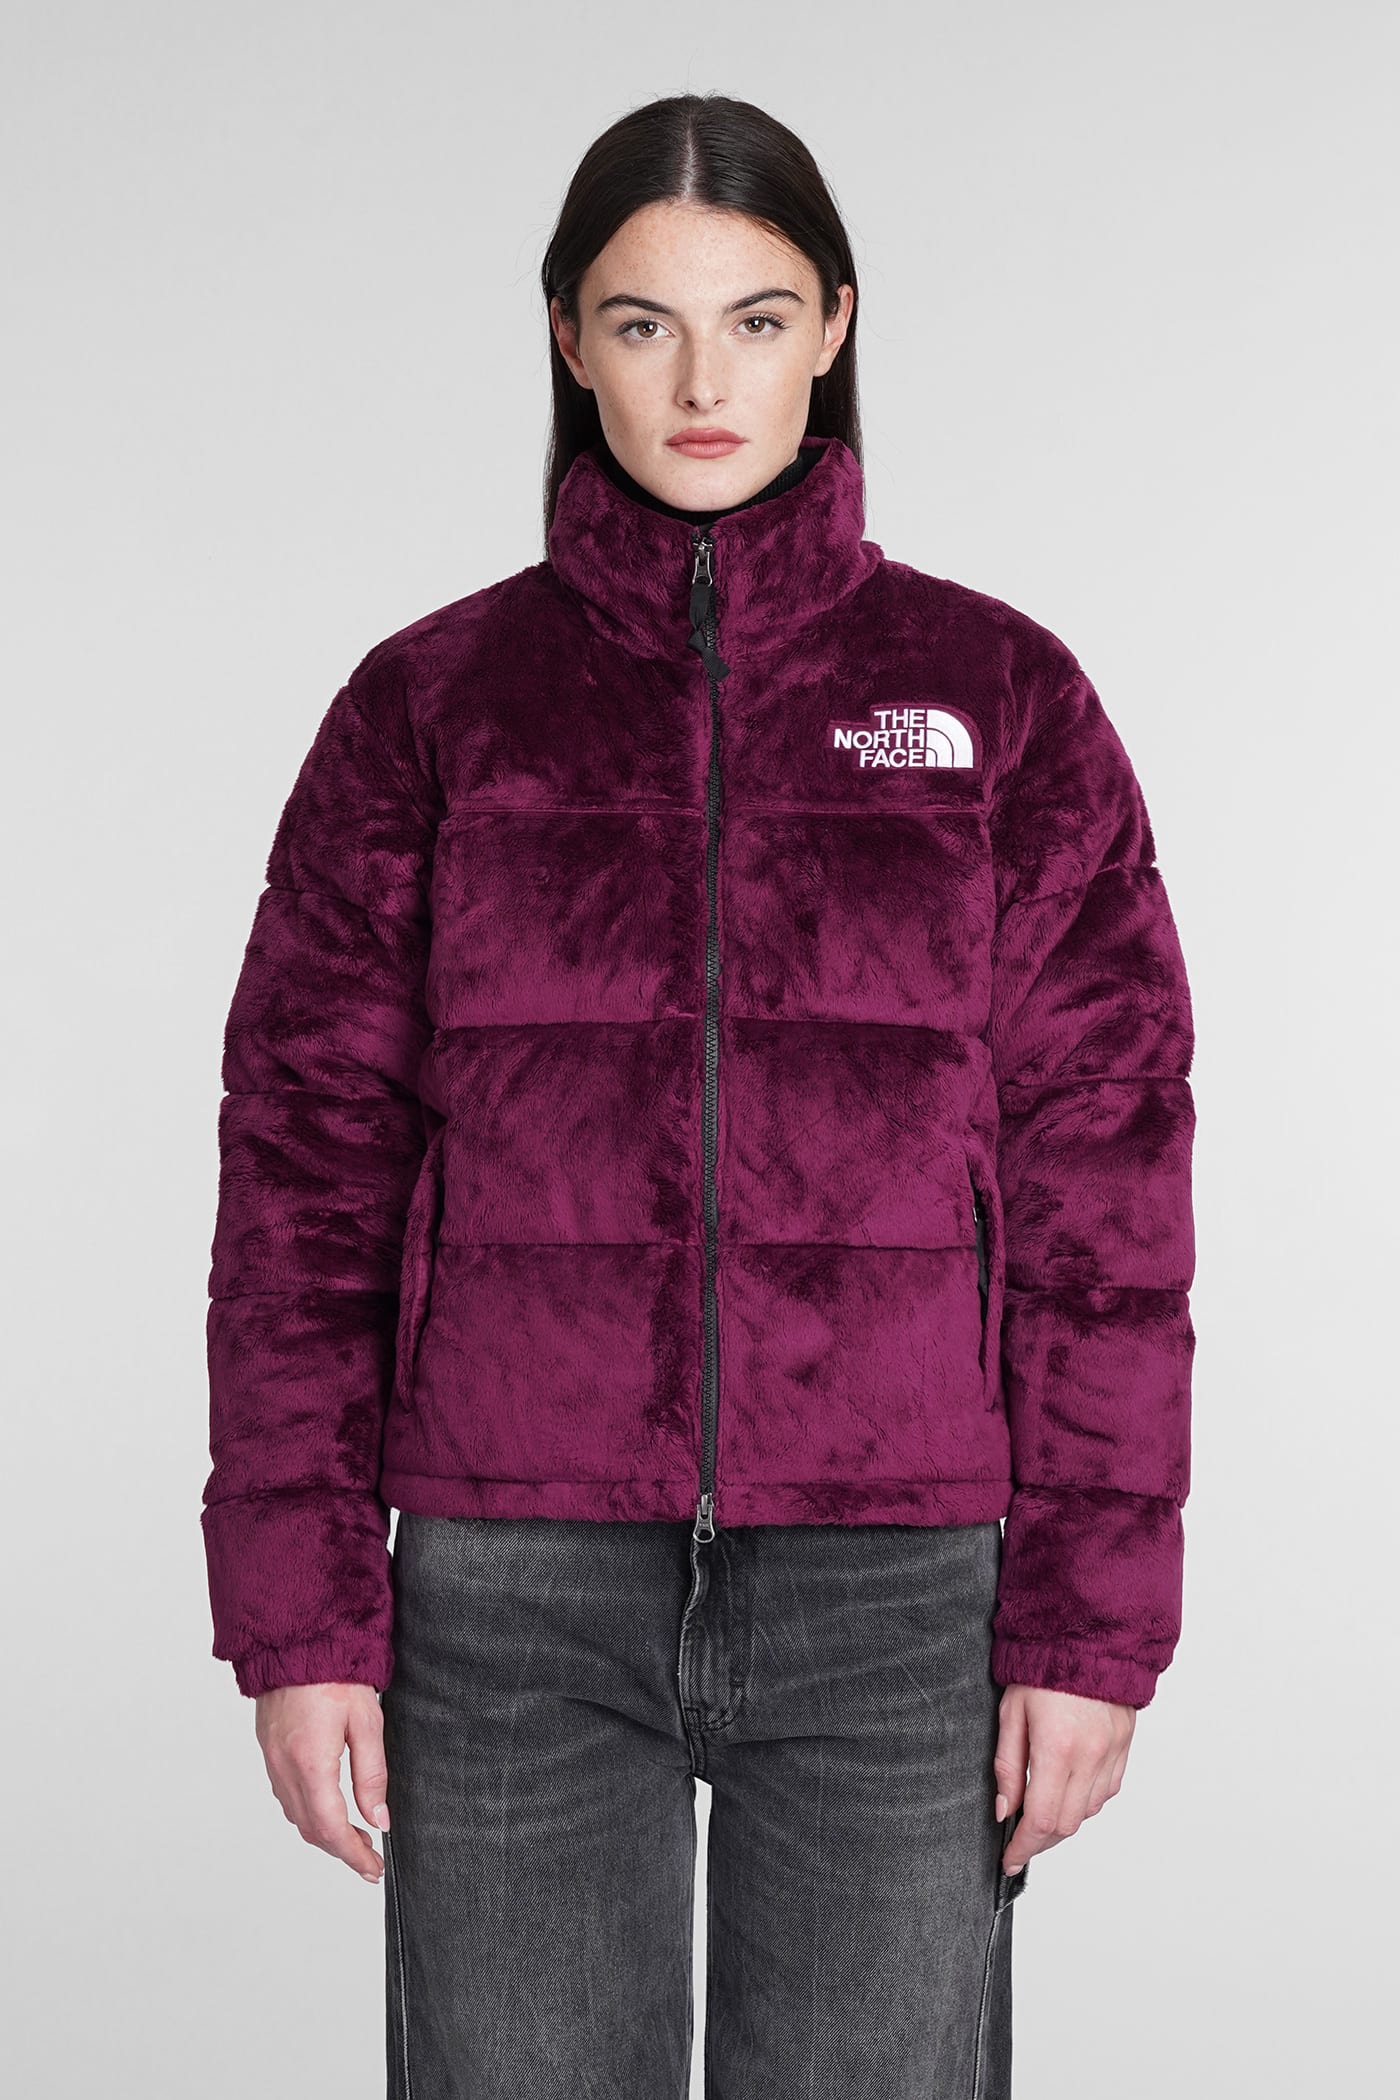 THE NORTH FACE PUFFER IN BORDEAUX CHENILLE